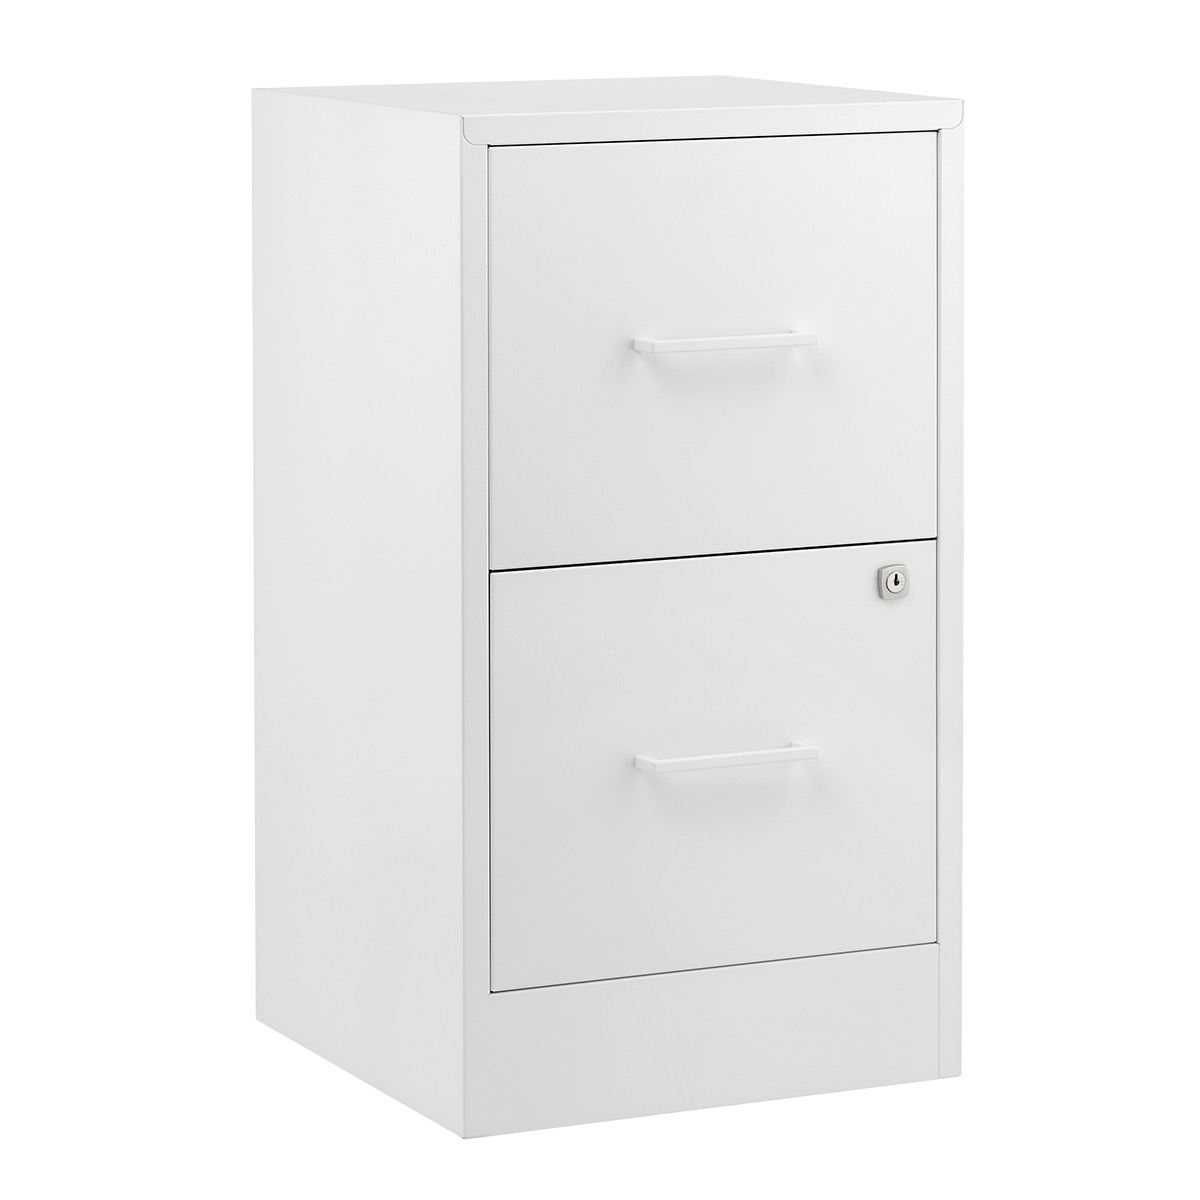 The Container Store 2-Drawer Locking Filing Cabinet White, 16-1/4 x 15-5/8 x 28-15/16 H